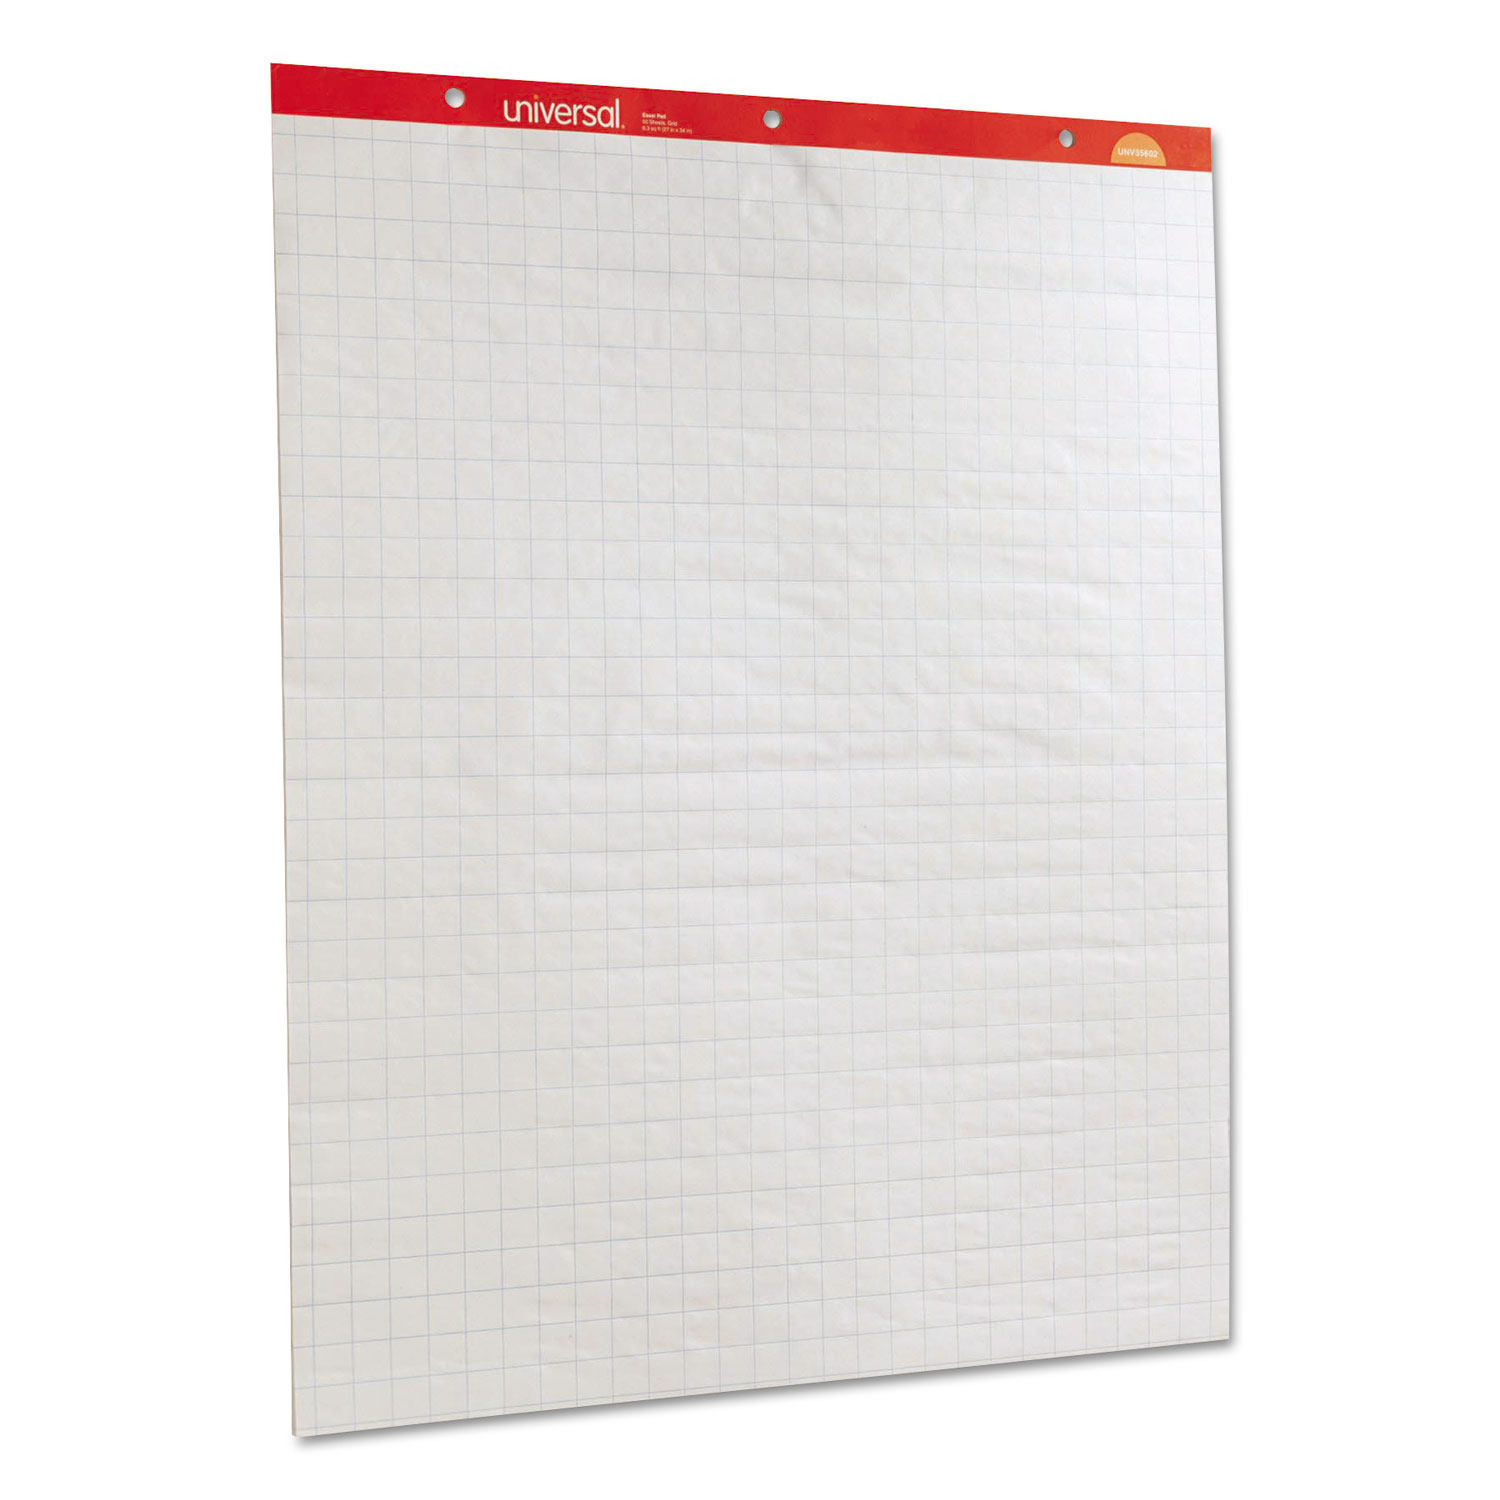 Deluxe Sugarcane Based Easel Pads, 27 x 34, White, 50 Sheet, 2/Pack